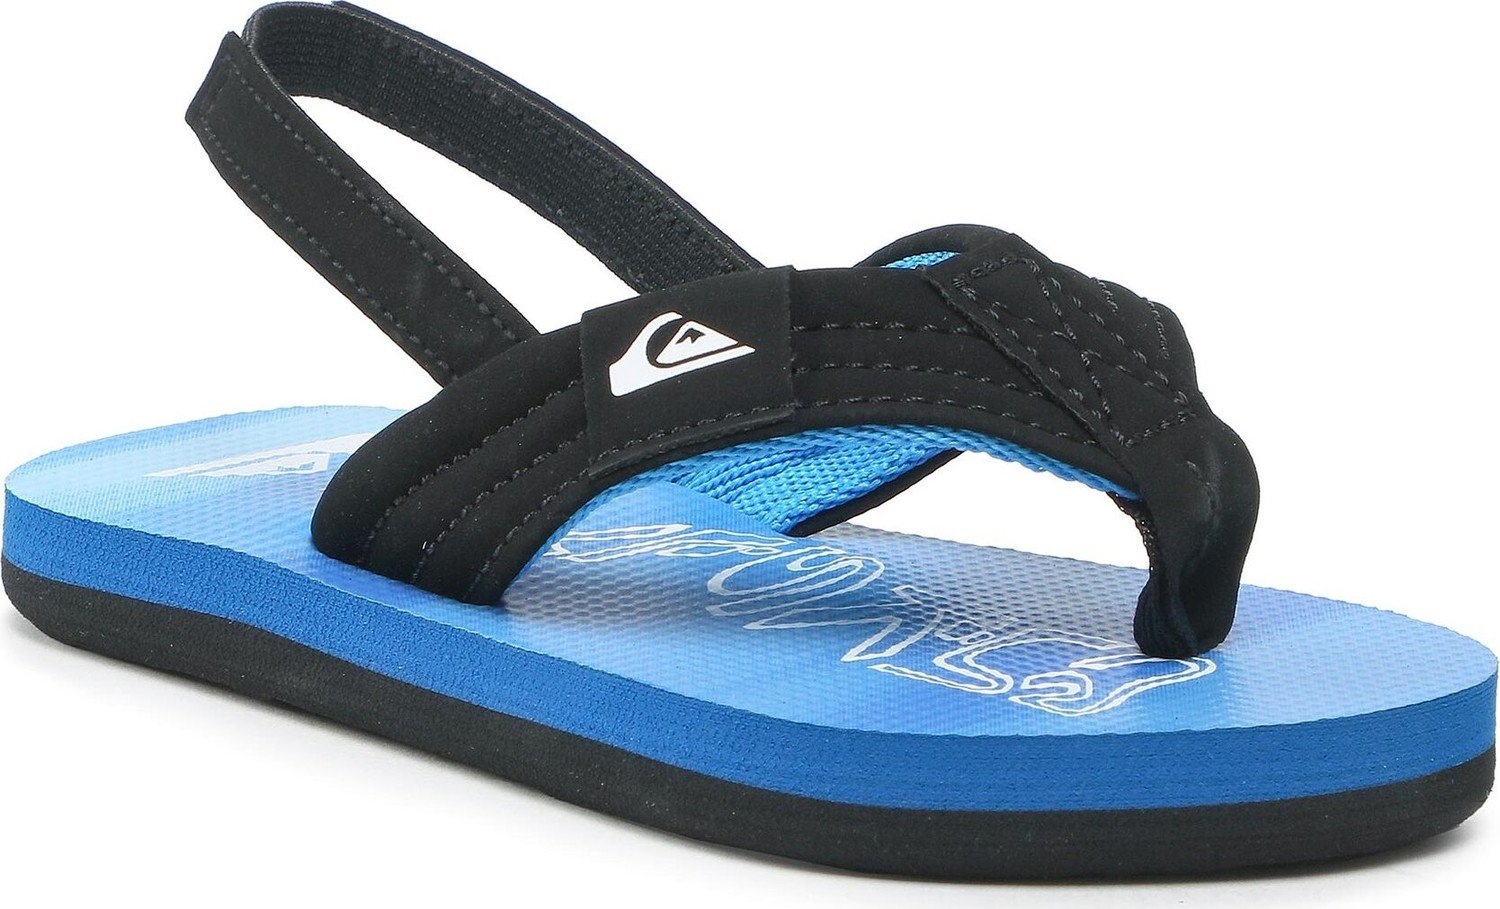 Sandály Quiksilver AQTL100066 BYJ2